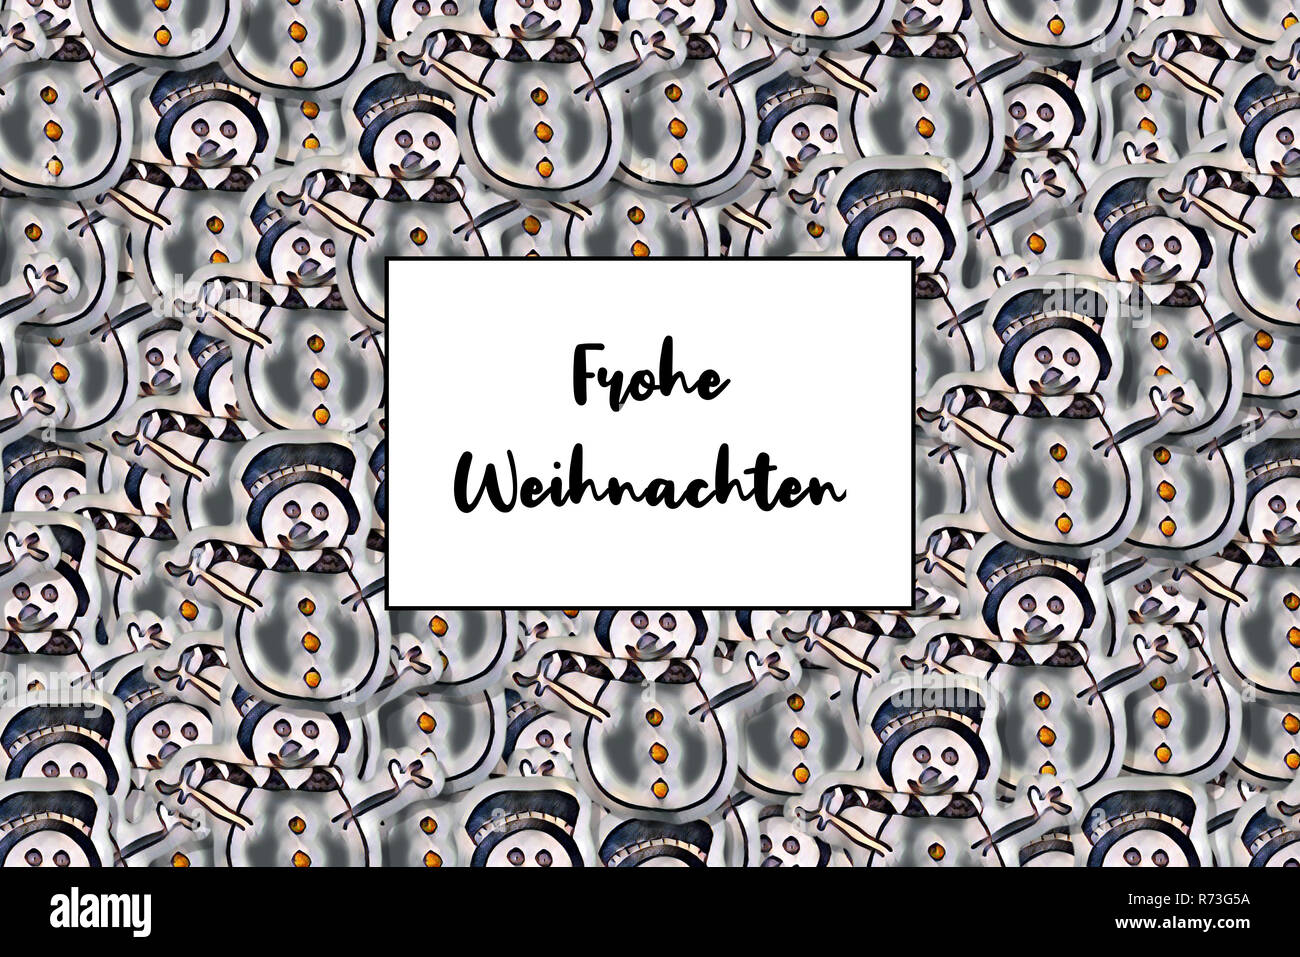 Frohe Weihnachten card (Merry Christmas in german) with snow man as a background Stock Photo